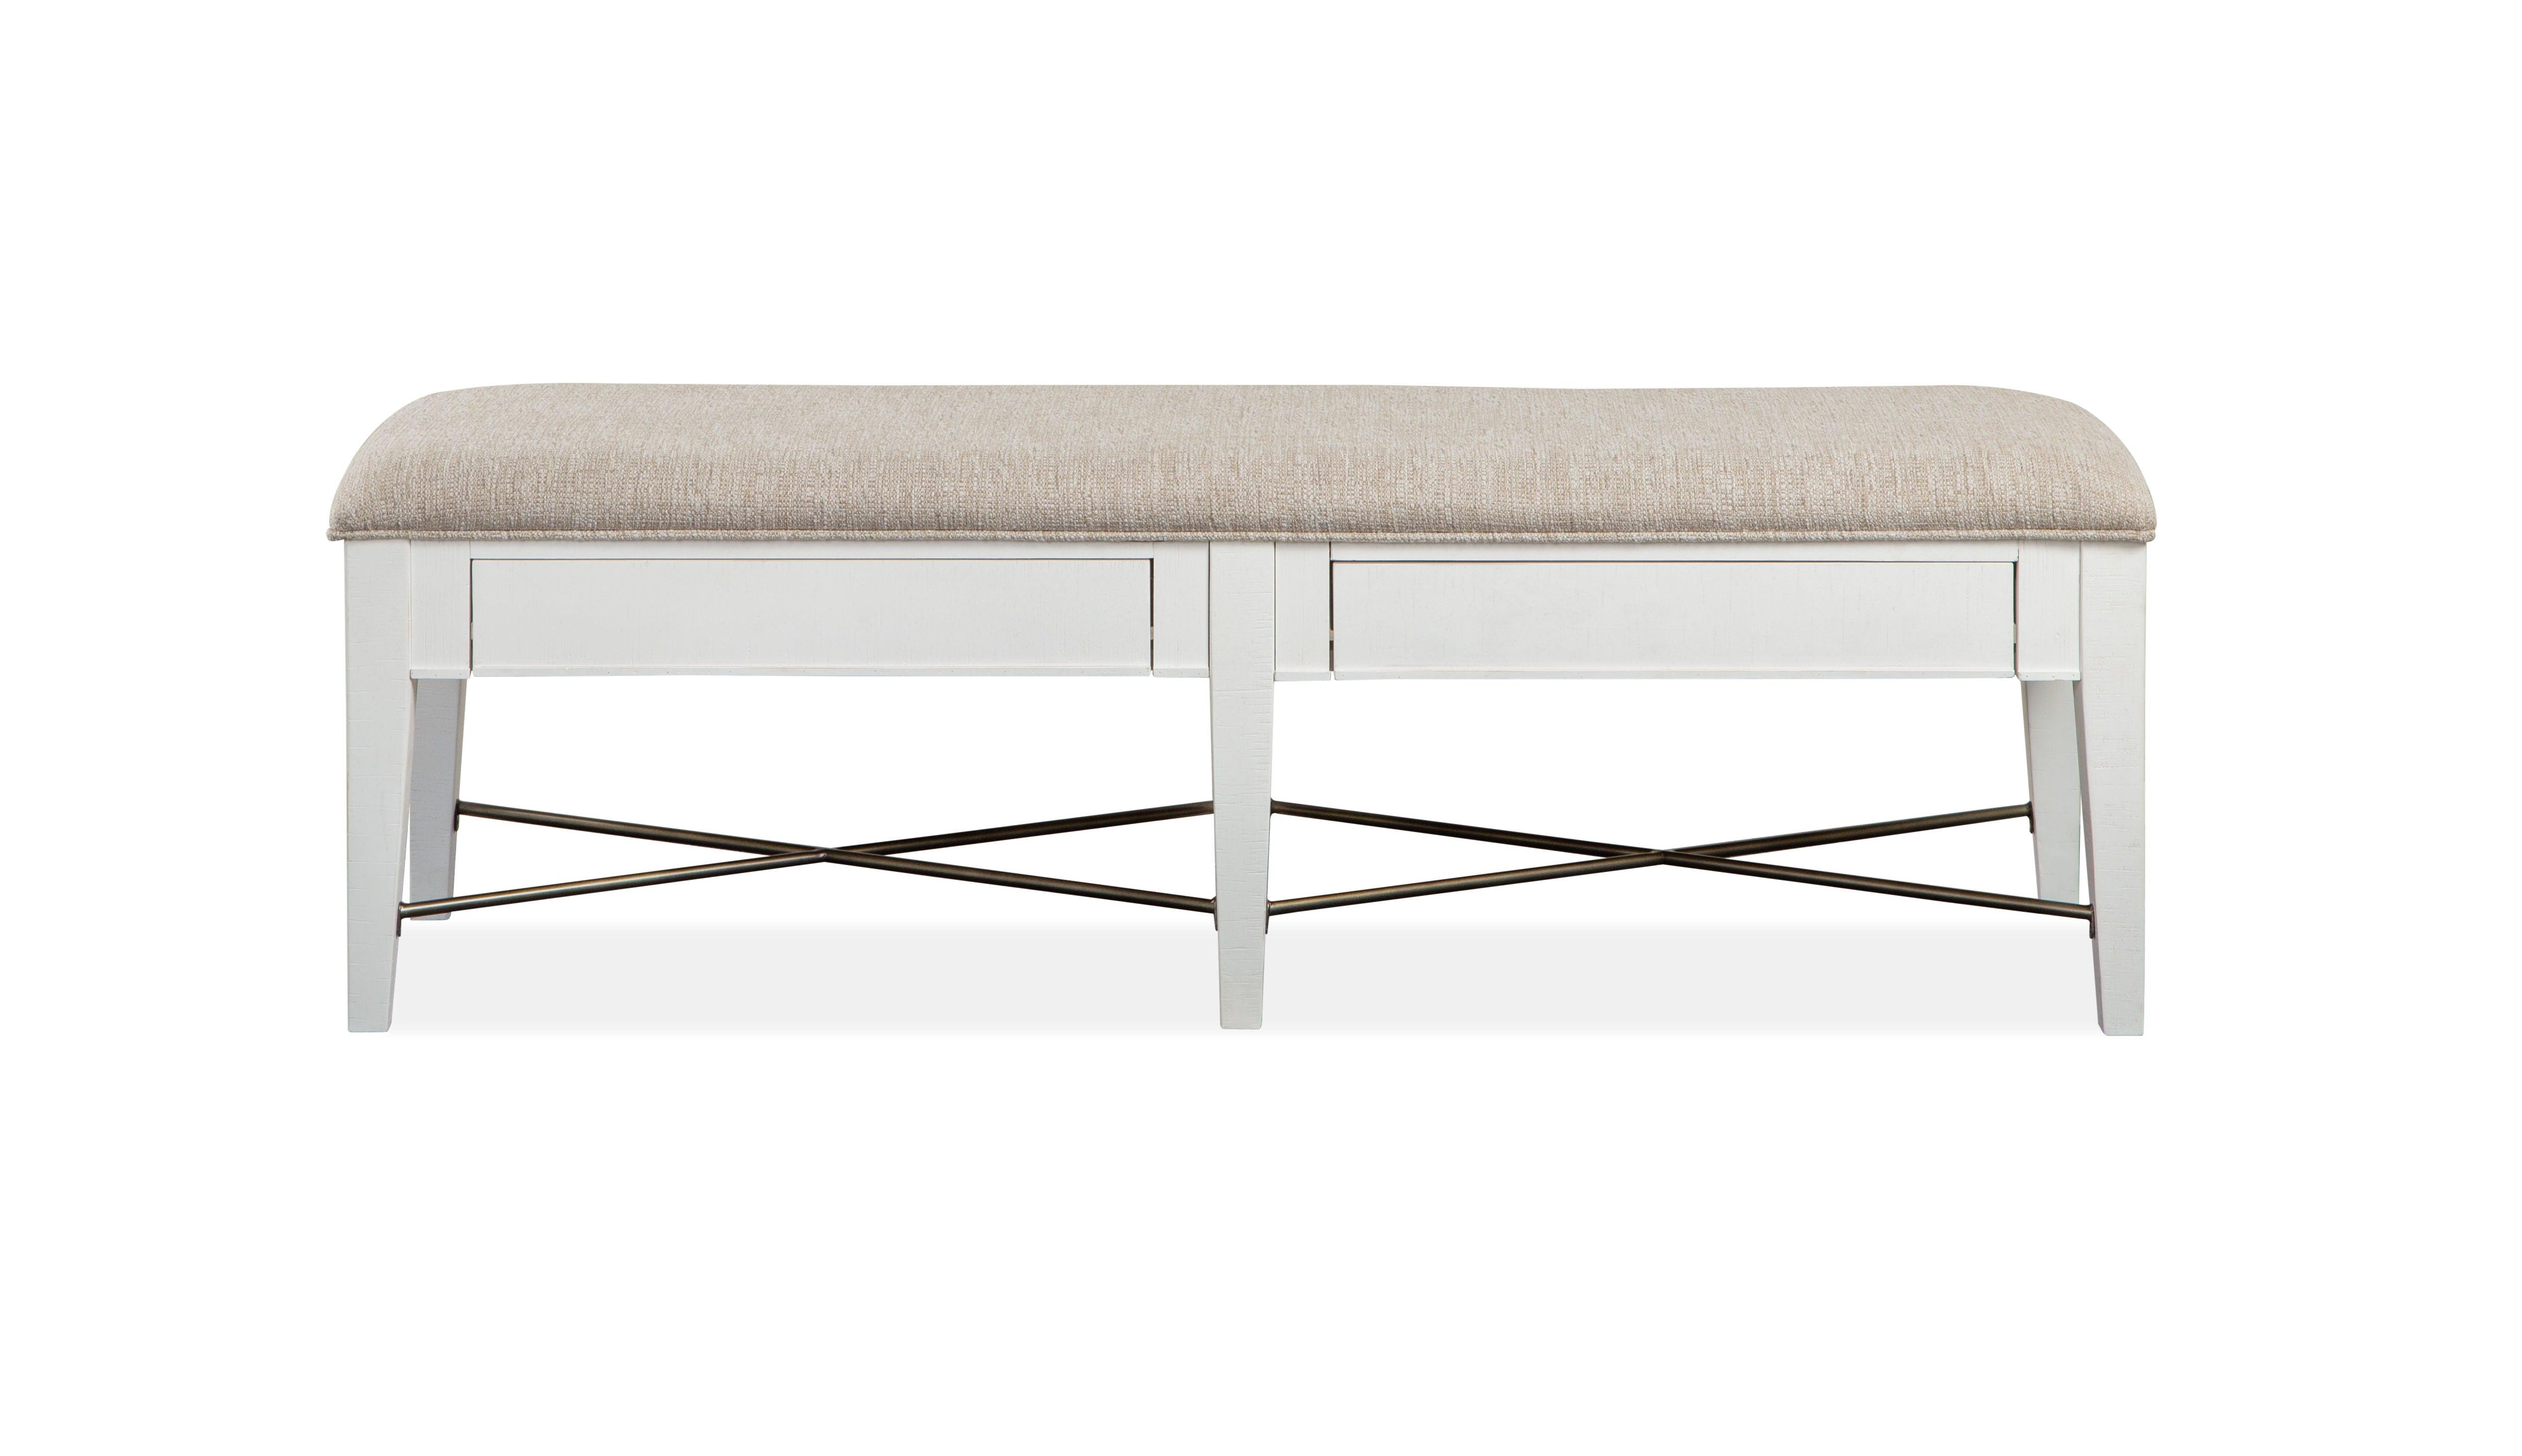 Magnussen Furniture - Heron Cove - Bench With Upholstered Seat - Chalk White - 5th Avenue Furniture